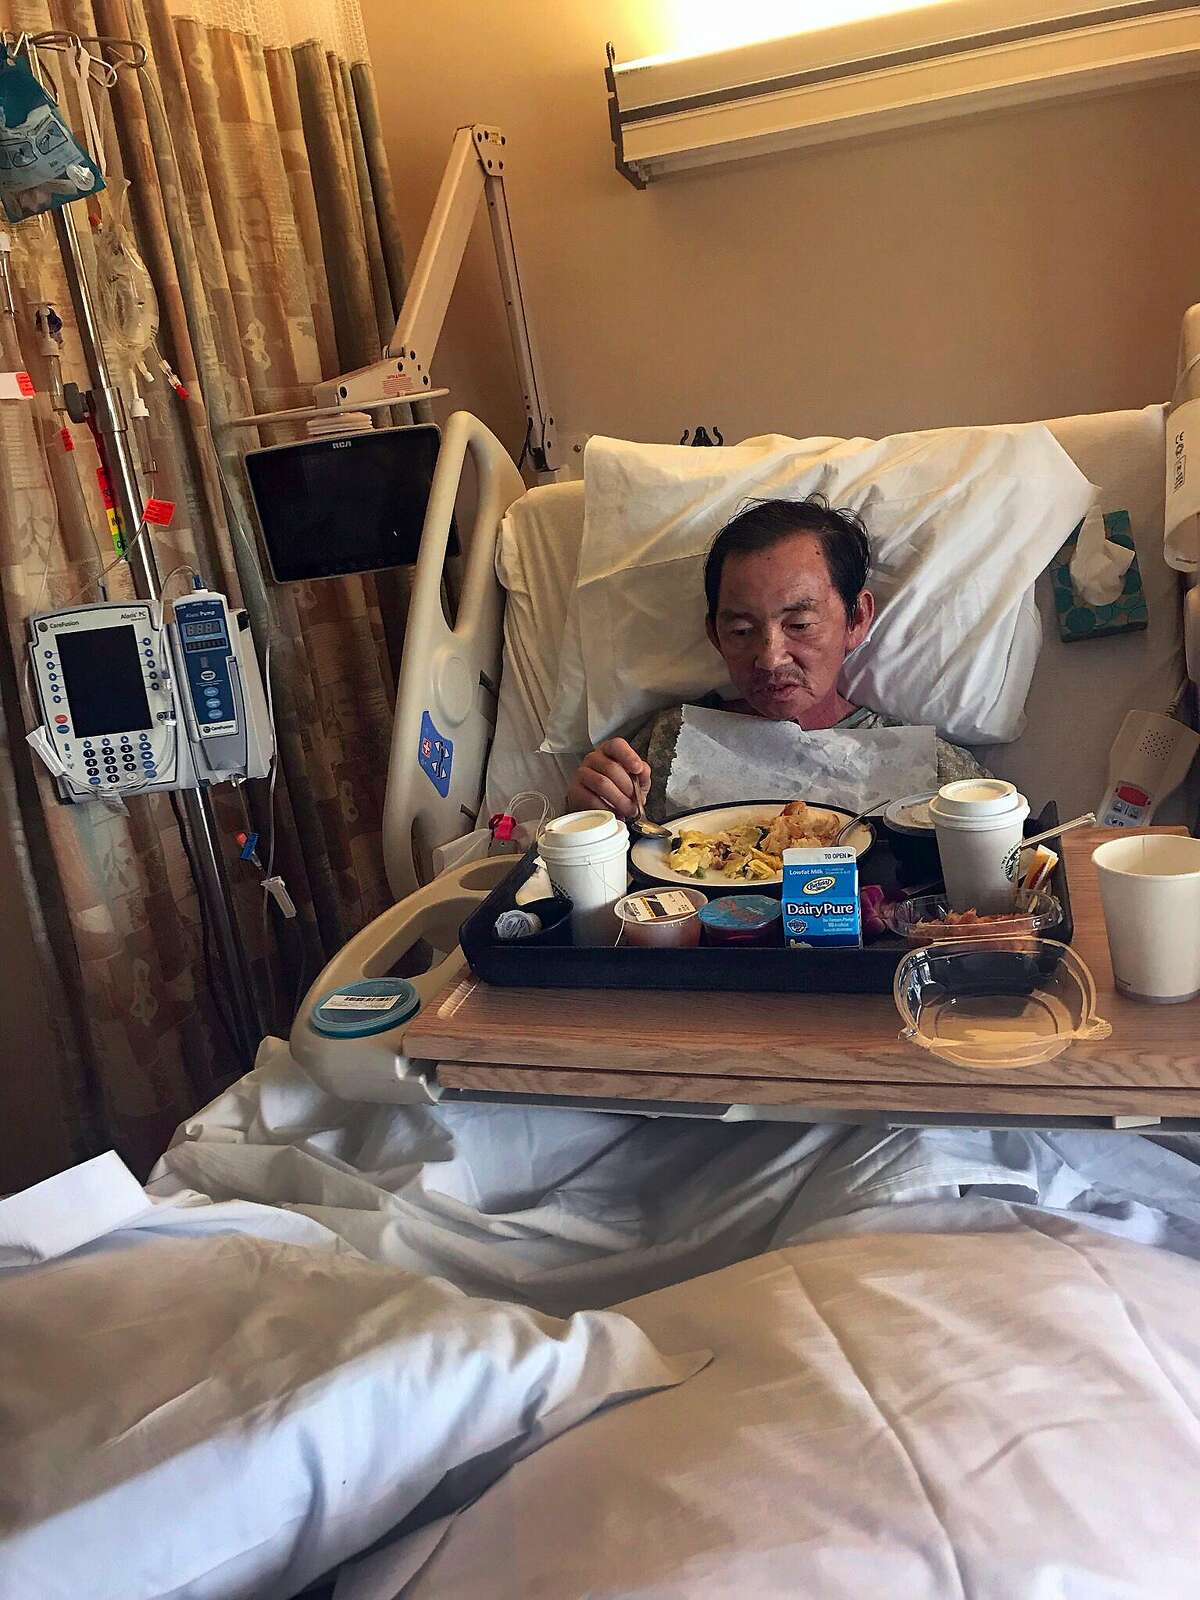 Tu Le of San Jose, is shown hospitalized at Good Samaritan Hospital in San Jose, Calif. on March 30, 2018. Le suffers from a rare form of cancer and a bone marrow transplant could save his life. His two brothers in Vietnam are matches to supply the marrow transplant but they have been denied entry visas to the United States.